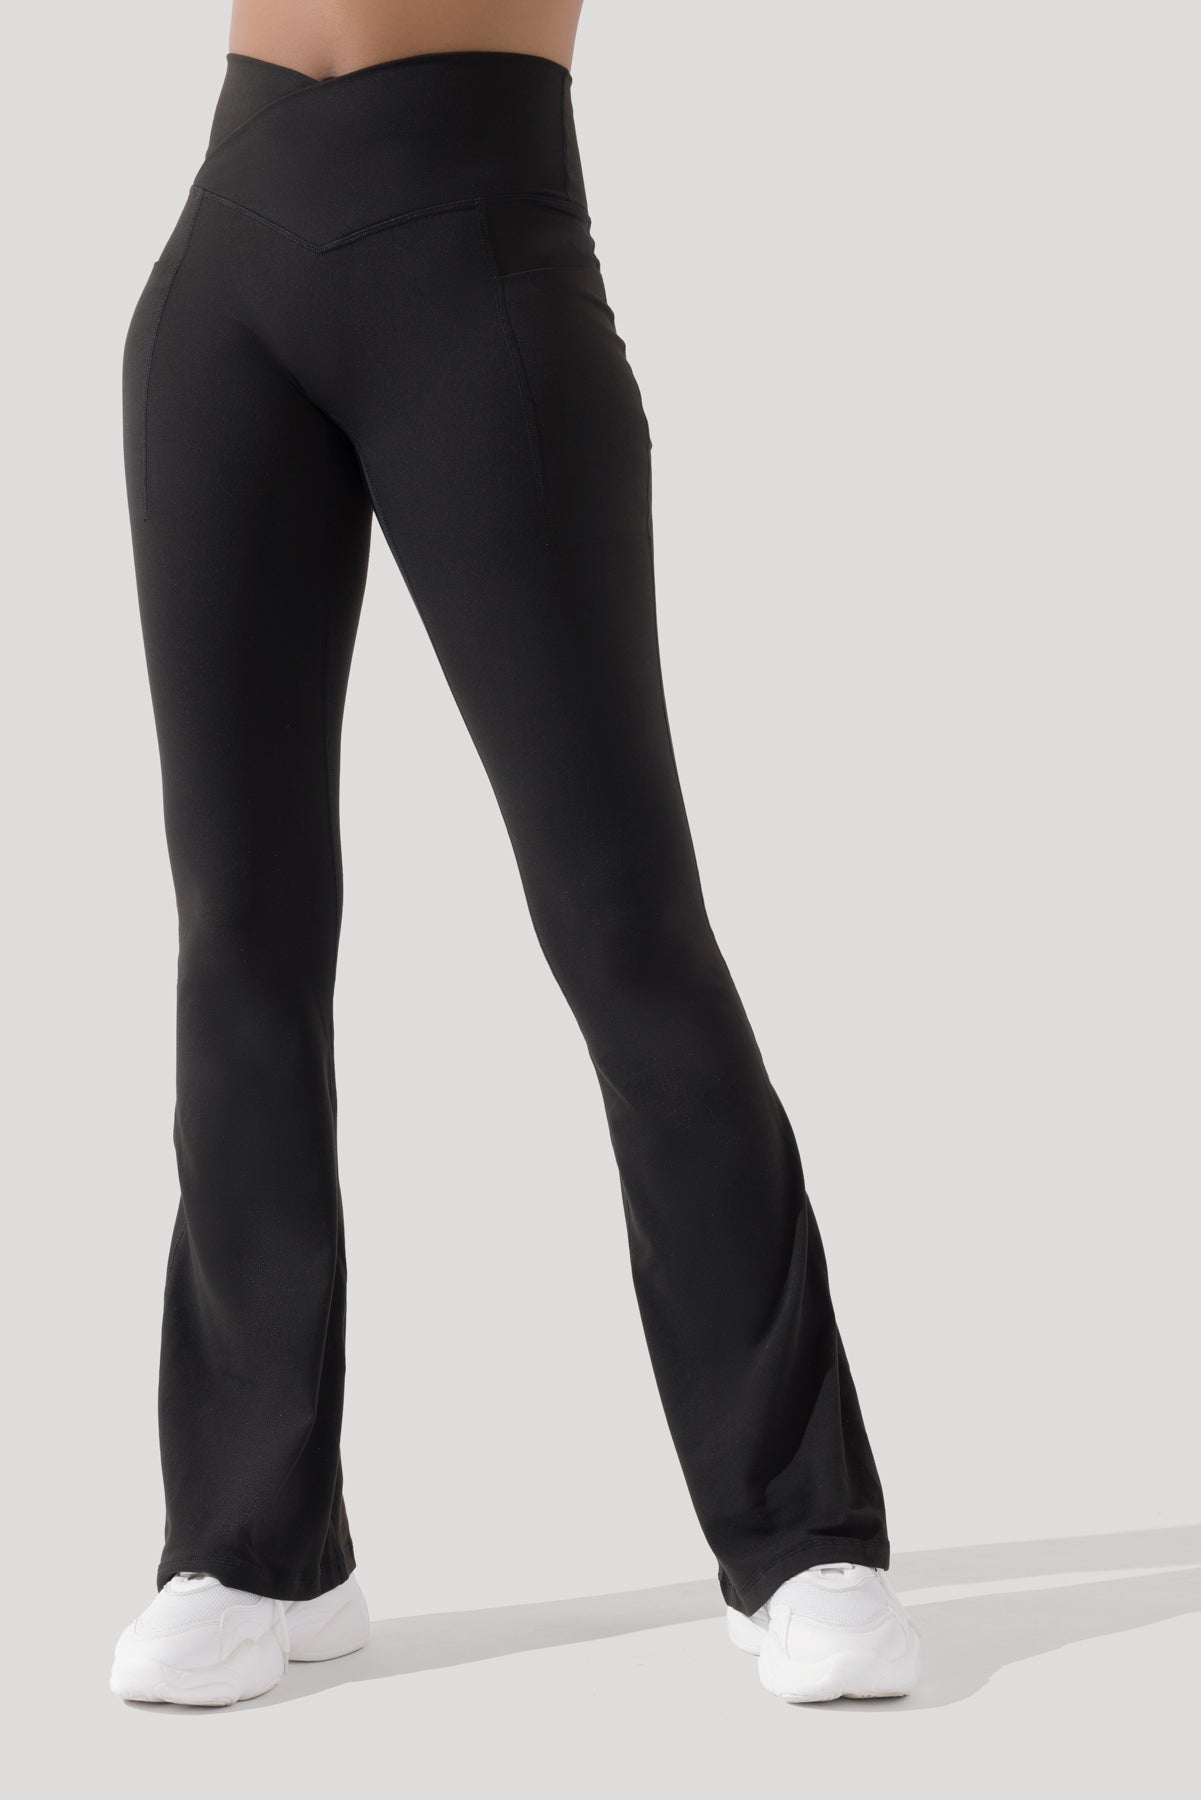 New Now Logo Black on White Crossover leggings with pockets